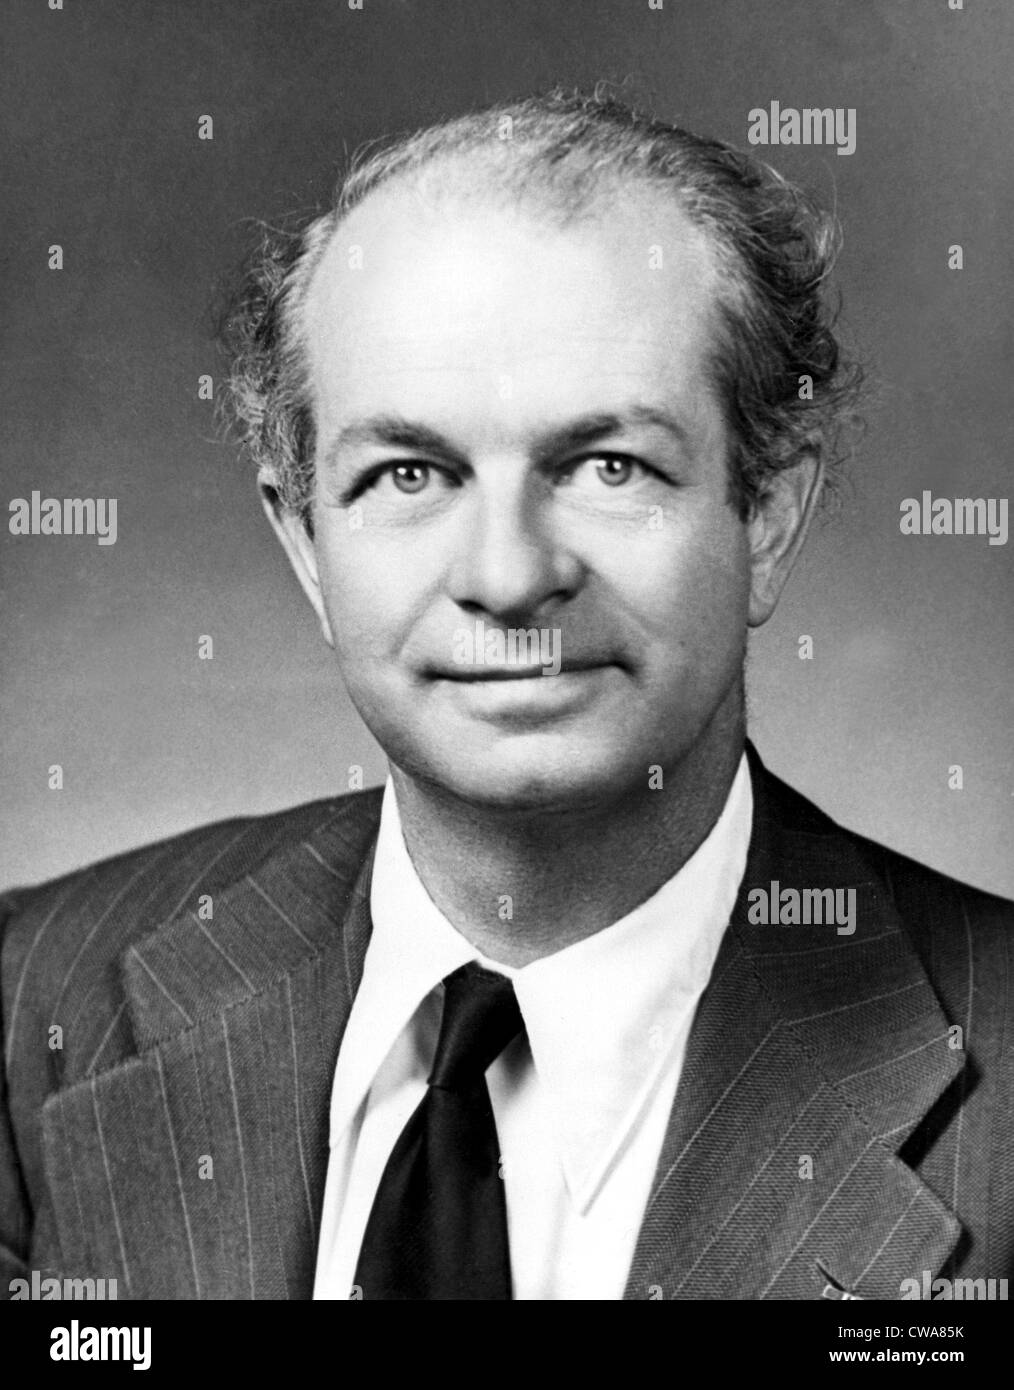 Dr. Linus Pauling in 1960. Pauling is the winner of the Nobel Prize in Chemistry for 1954 and recipient of the Nobel Peace Stock Photo